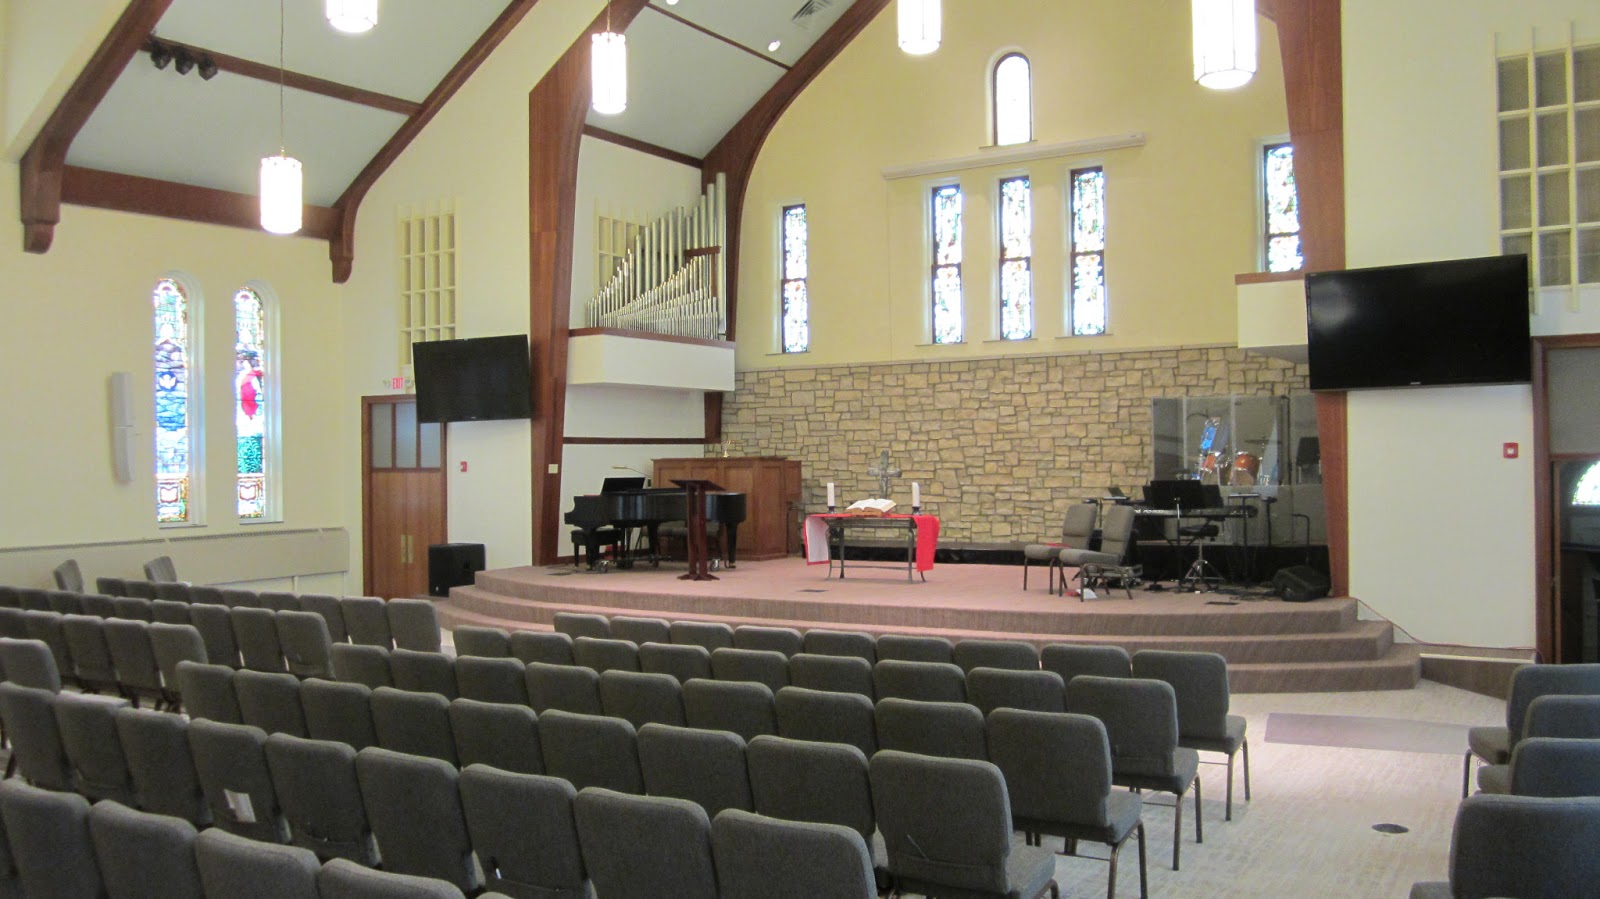 dbx PMC16 Personal Monitor Controller Performs Double-Duty at First United Methodist Church